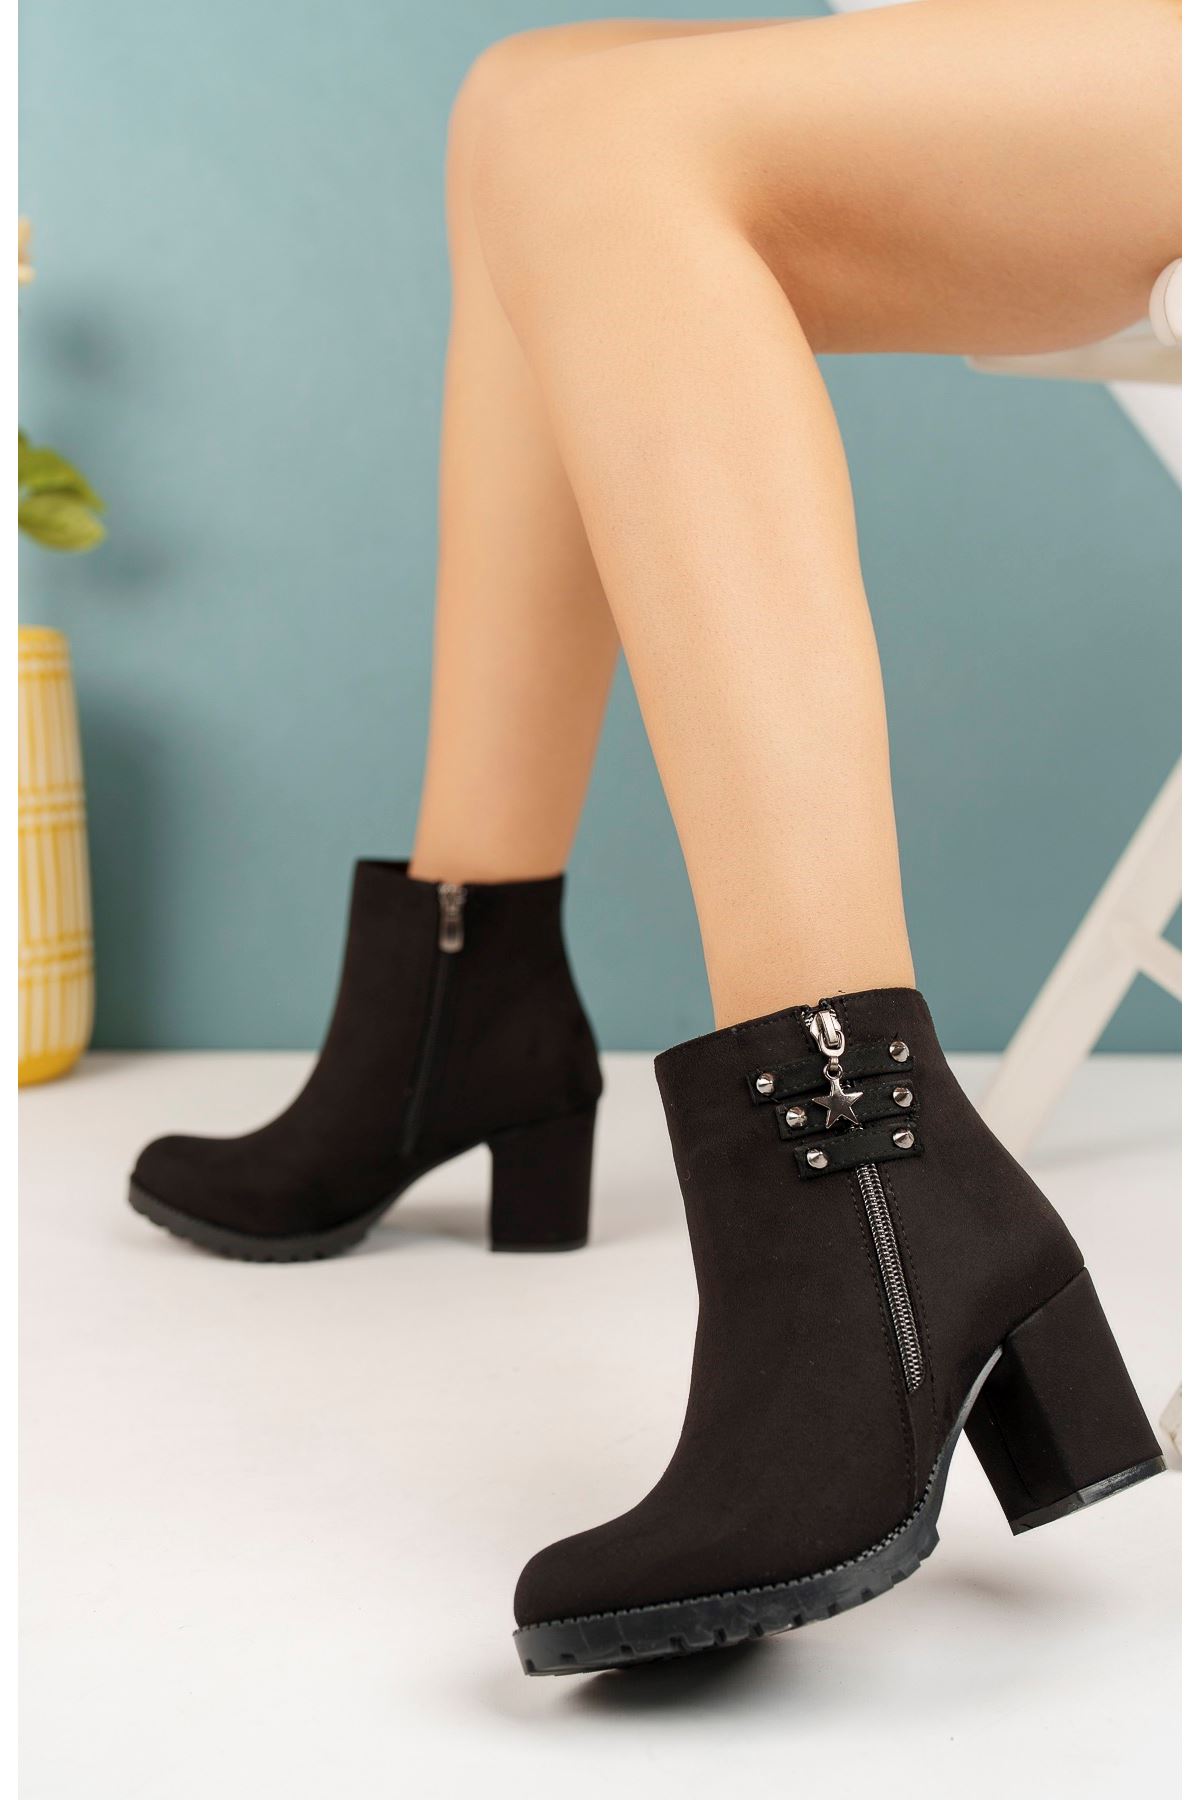 Troked Black Suede Women's Boots